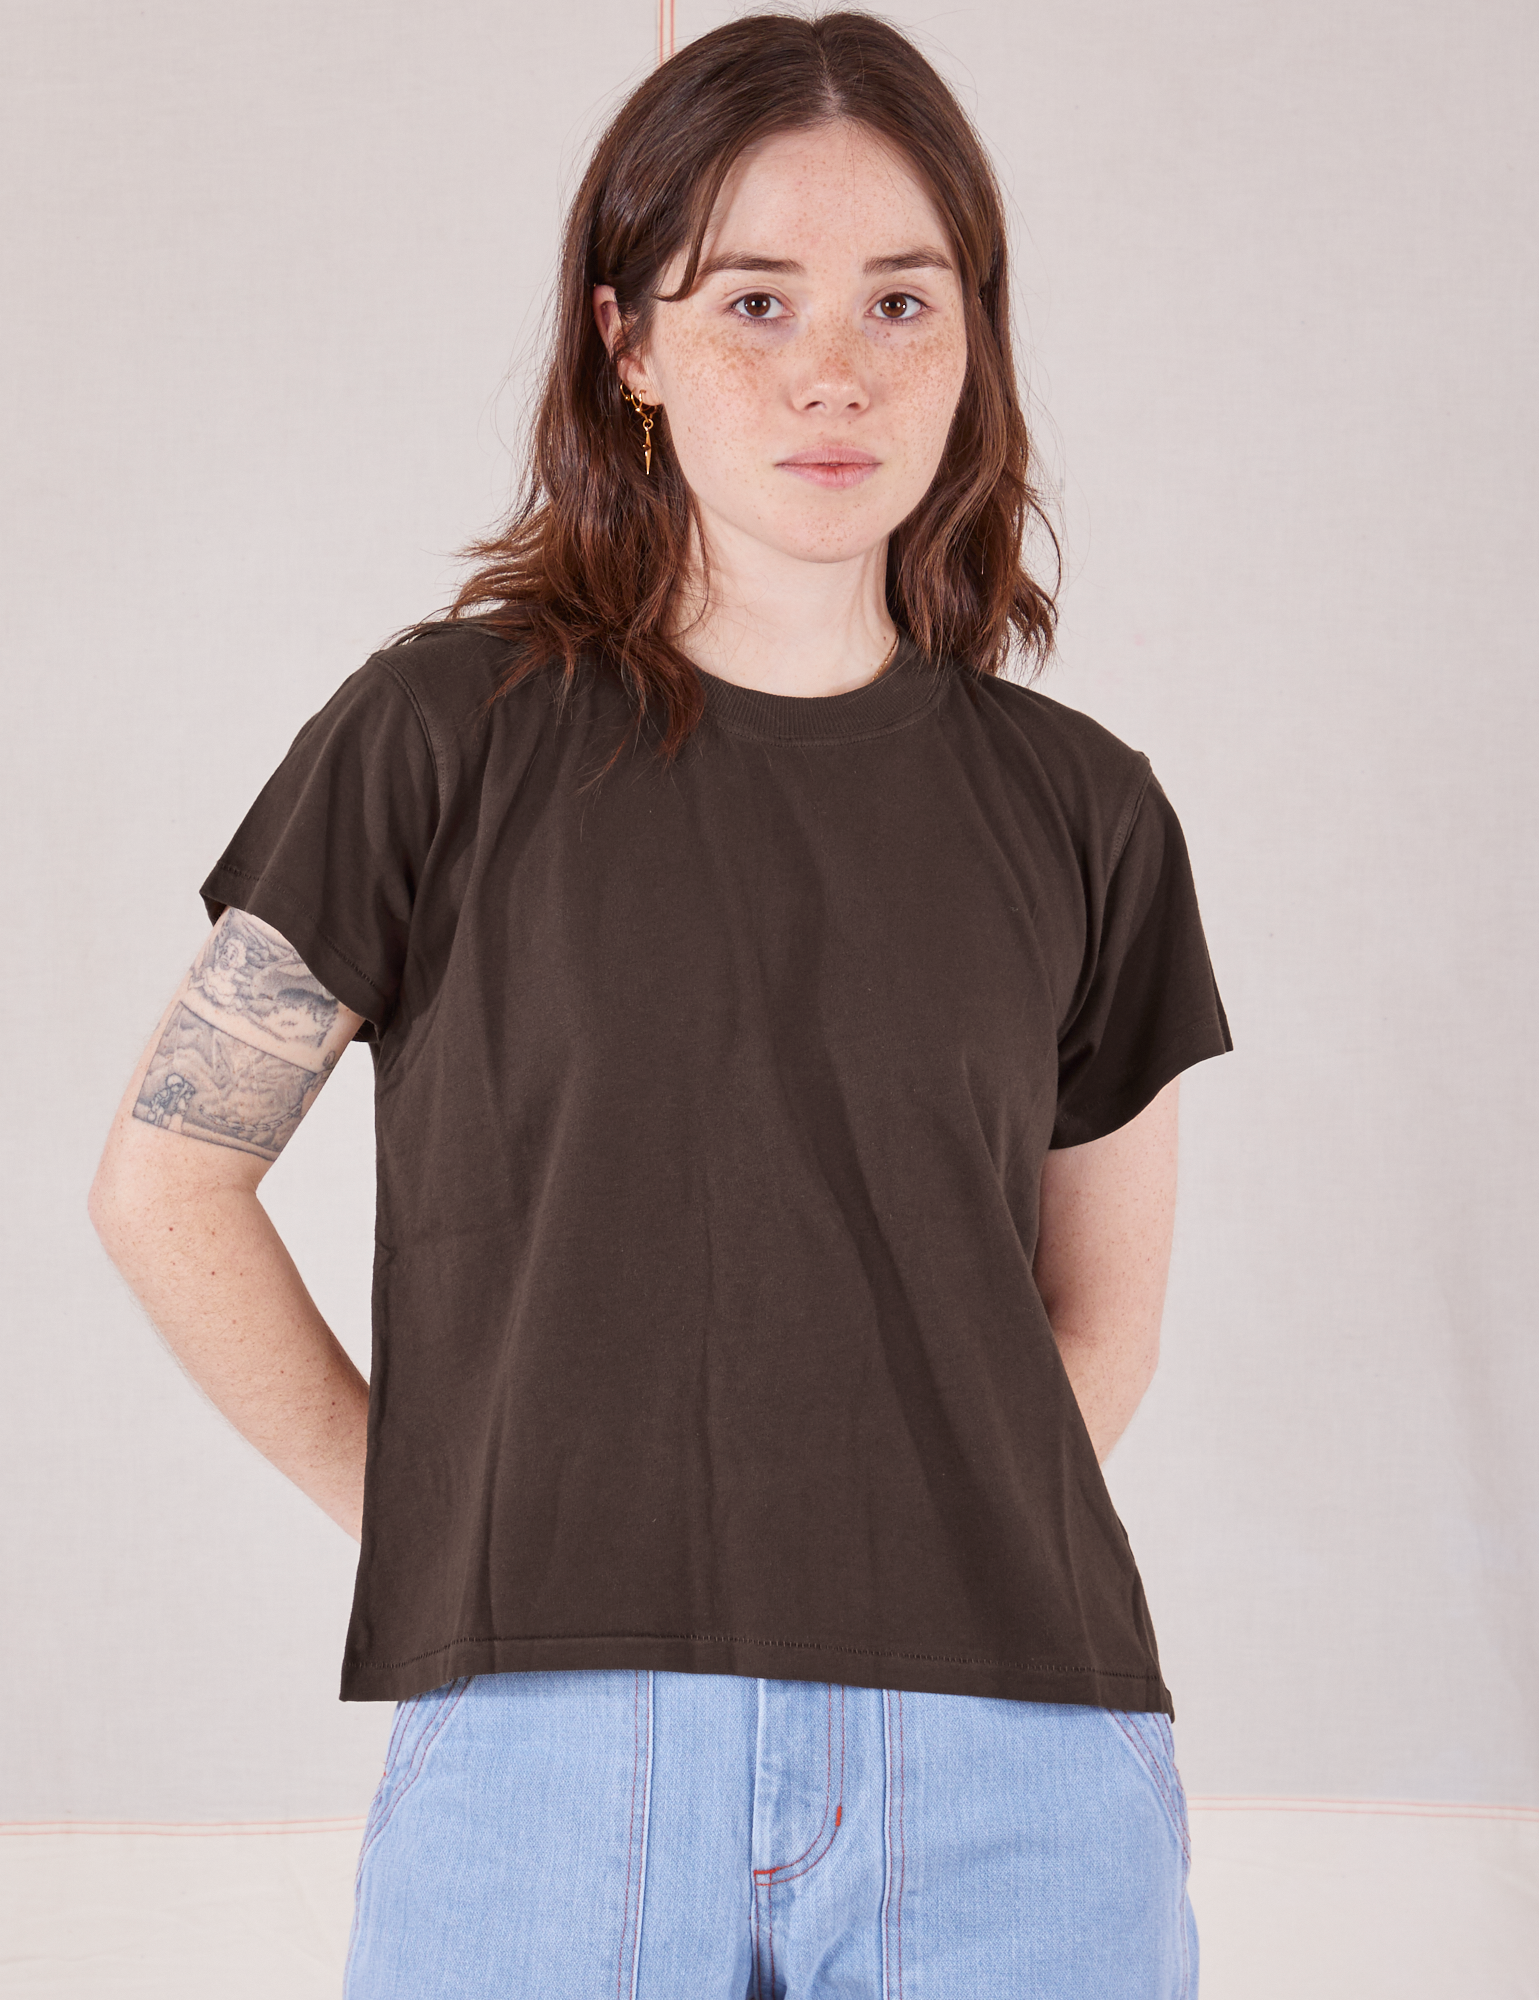 Hana is 5&#39;3&quot; and wearing P Organic Vintage Tee in Espresso Brown